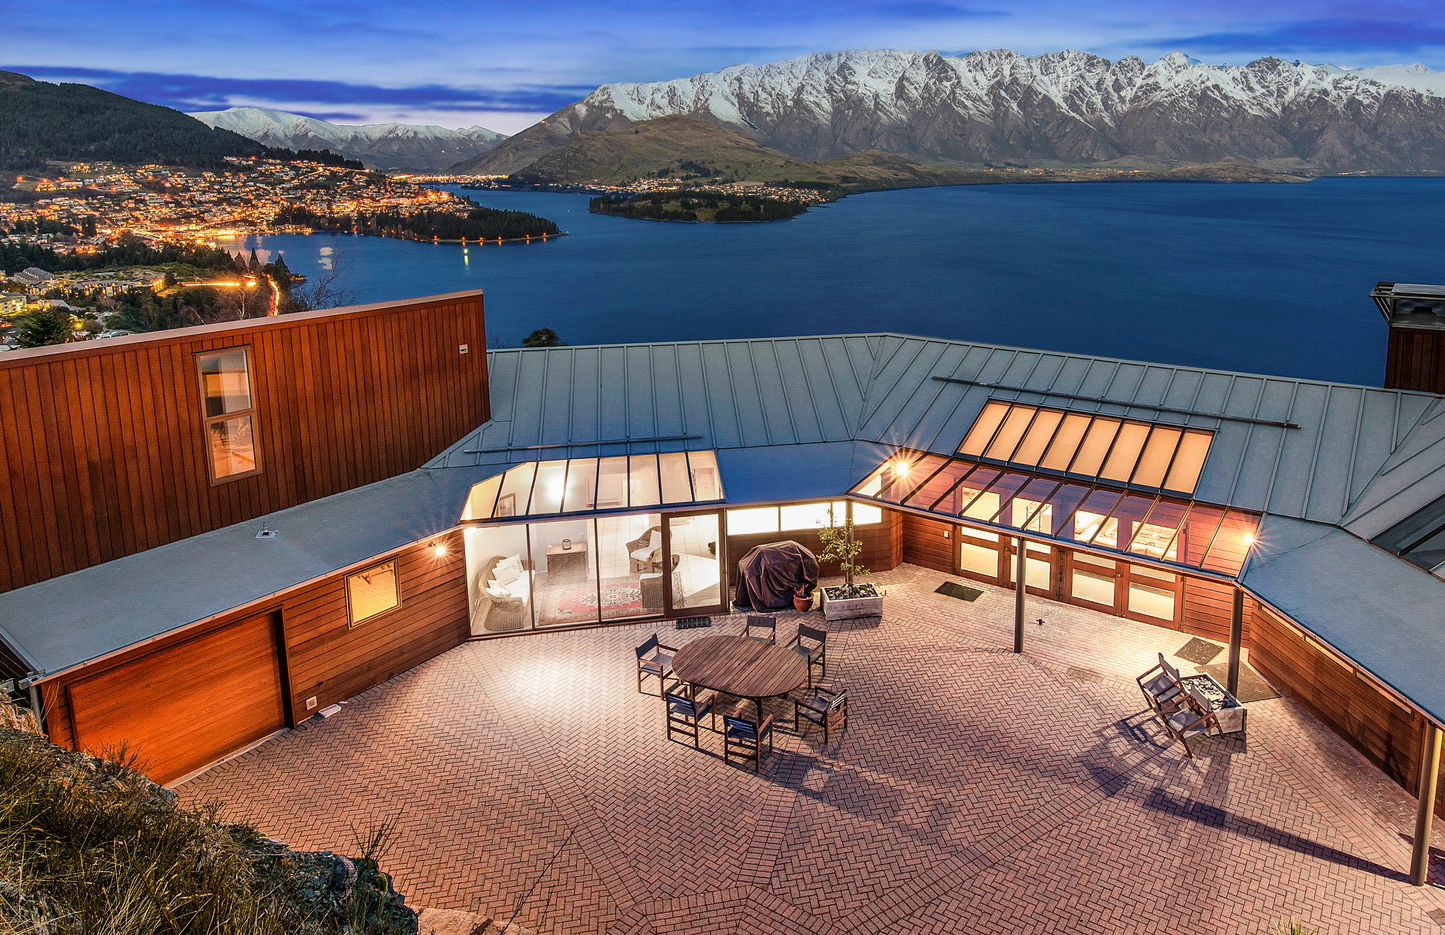 Stunning home in Queenstown, New Zealand. Click to enlarge.